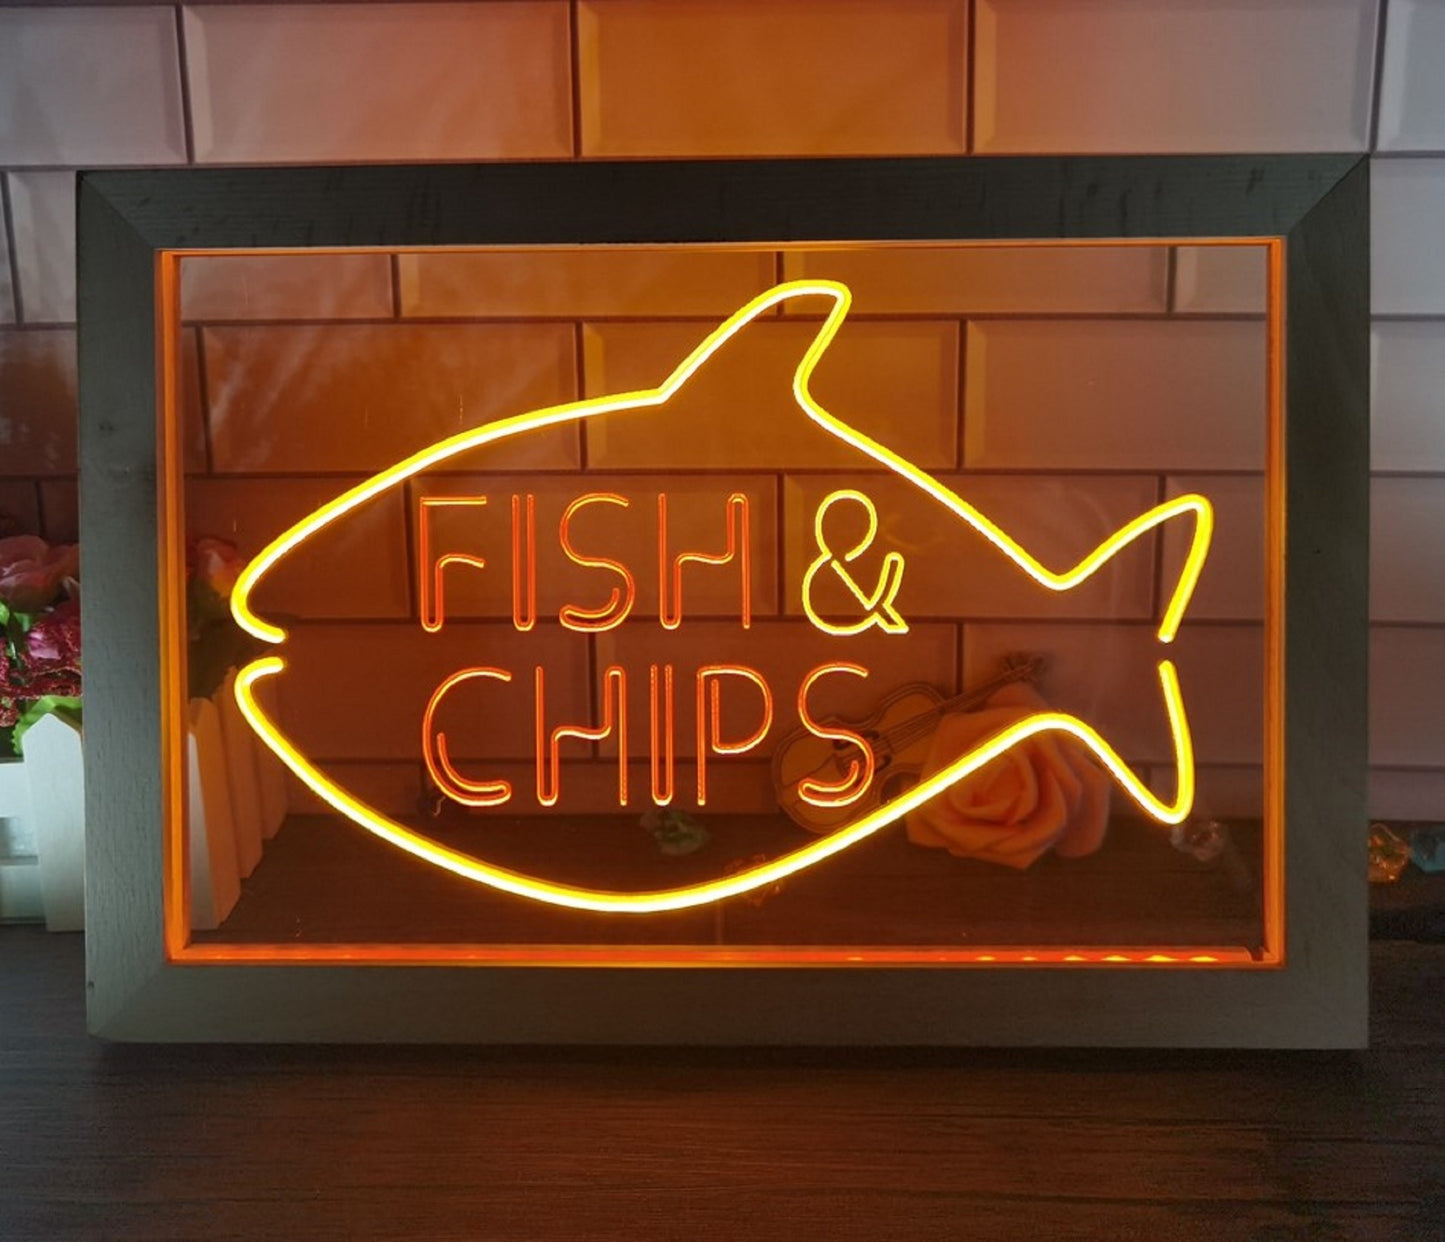 Neon Sign Framed Dual Color Fish & Chips Restaurant Wall Hanging Desk Top Decor